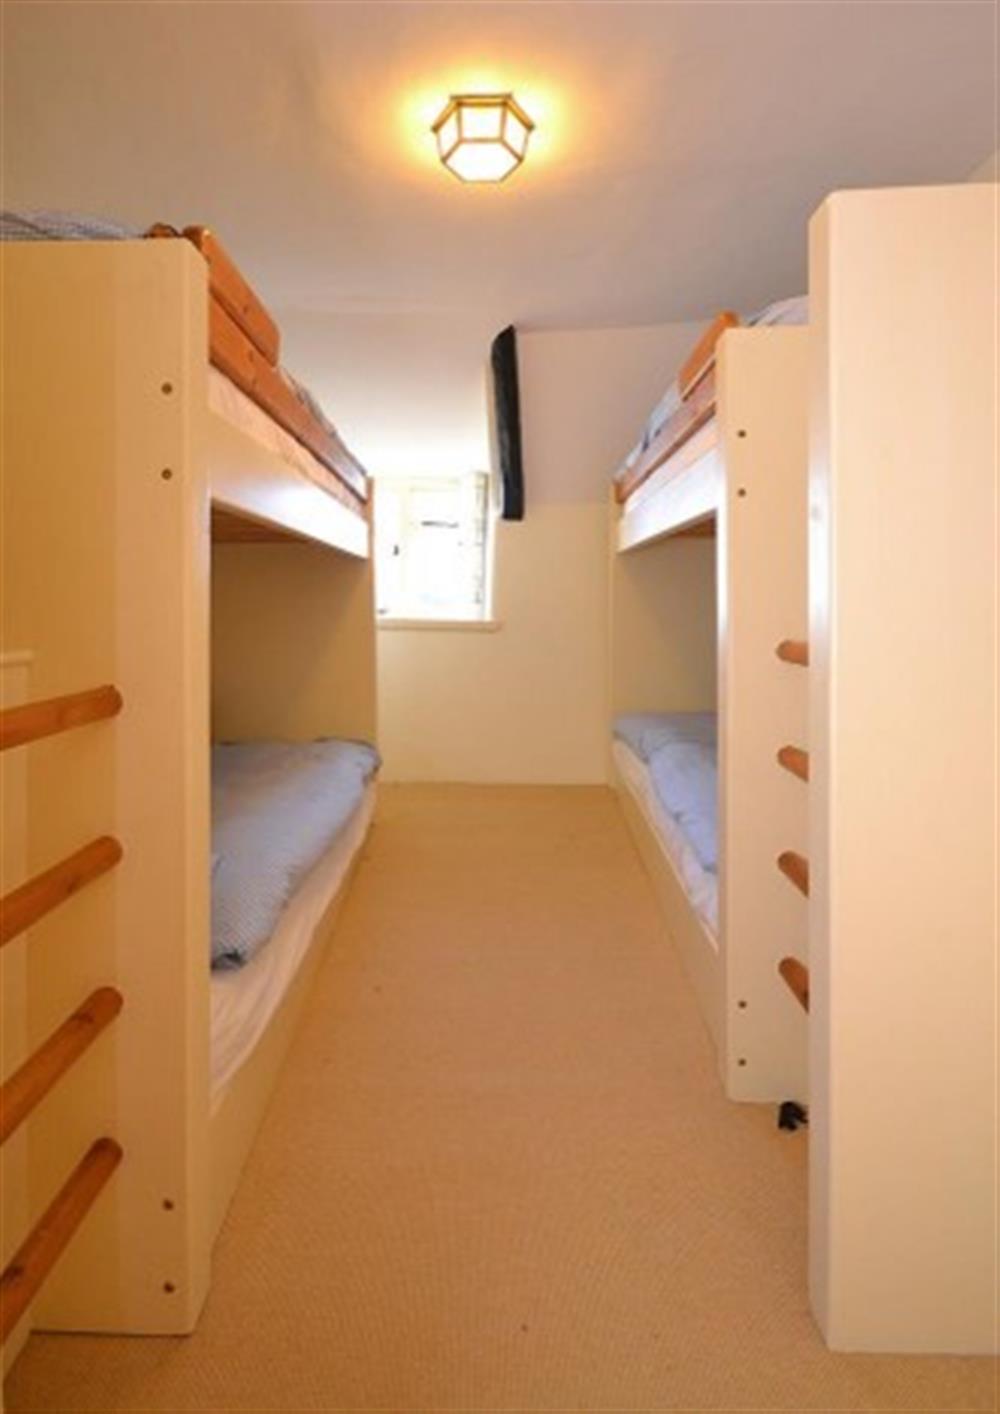 The bunk bed room  at Old Thatch in Torcross